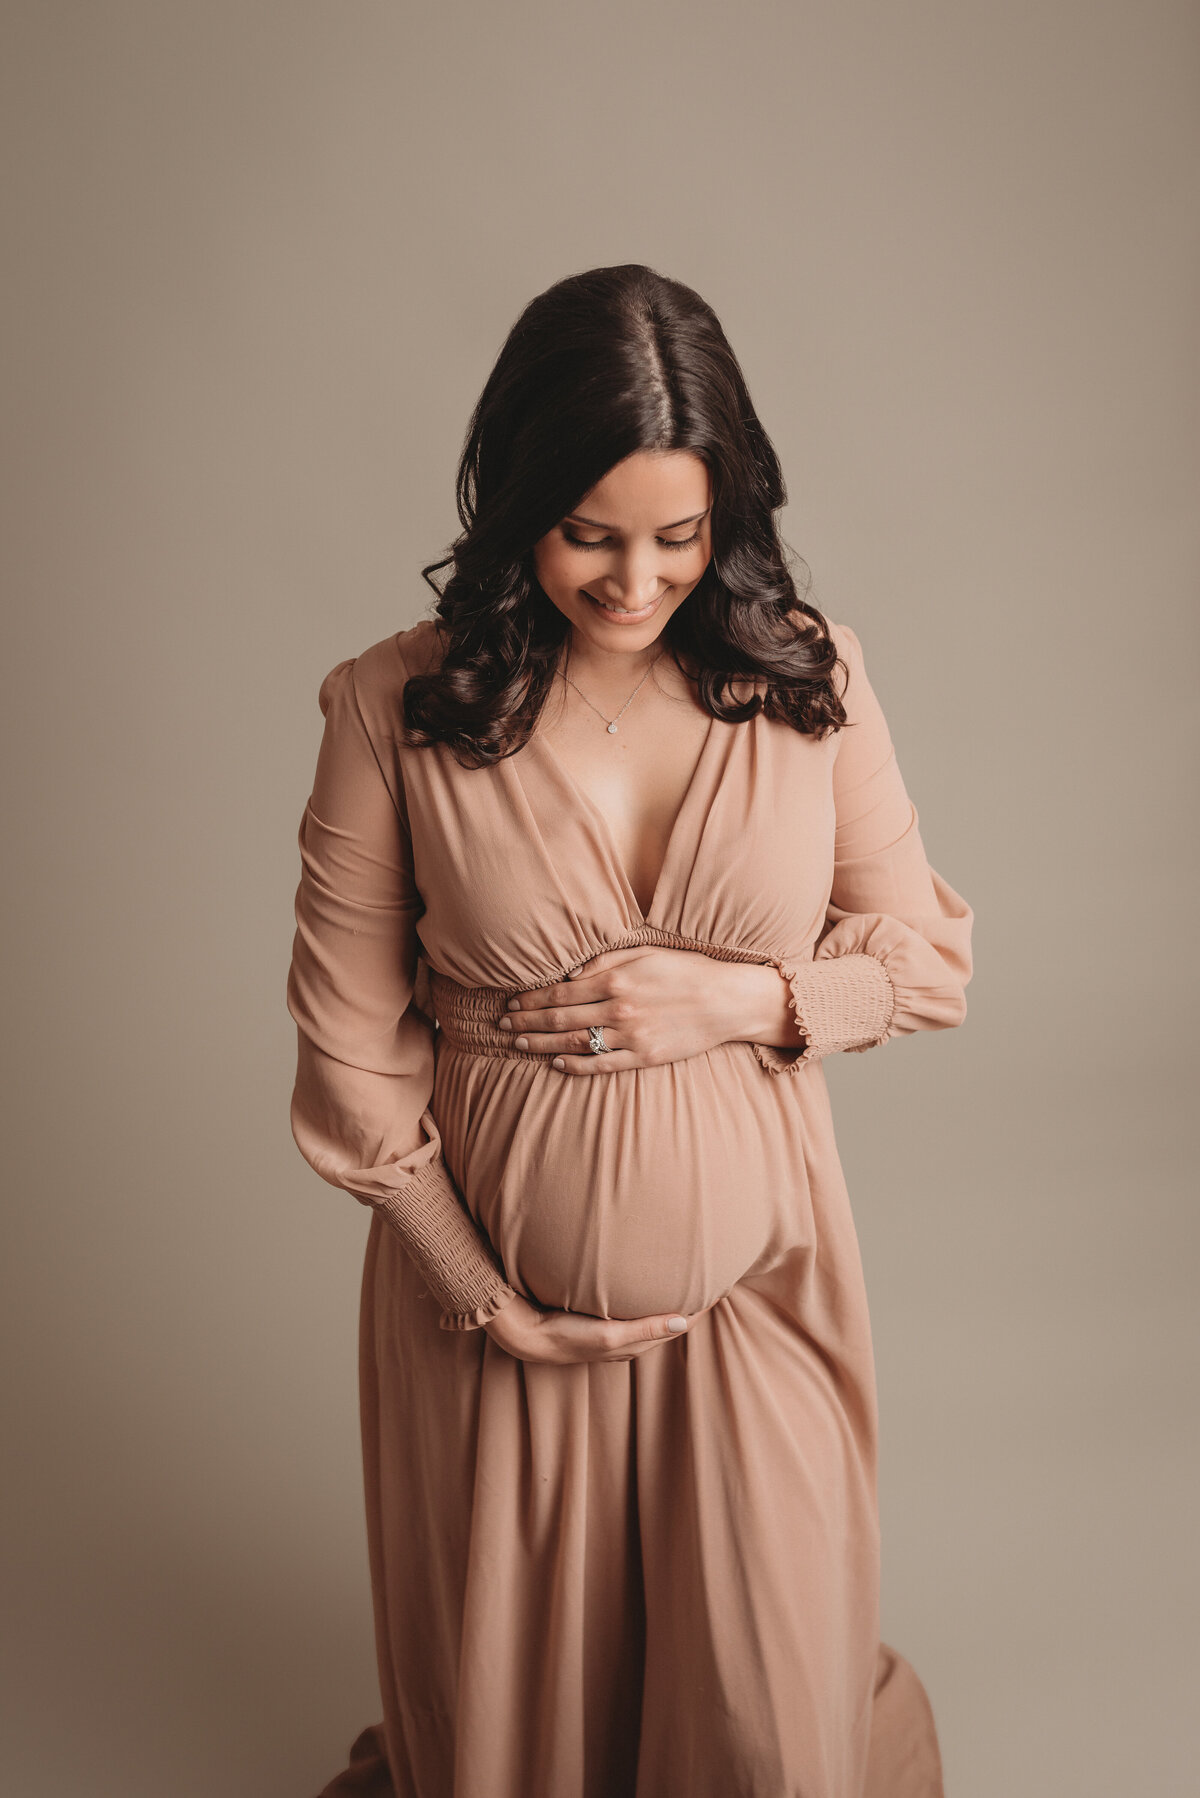 30 week pregnant woman wearing mauve long sleeve gown holding baby bump looking at her tummy